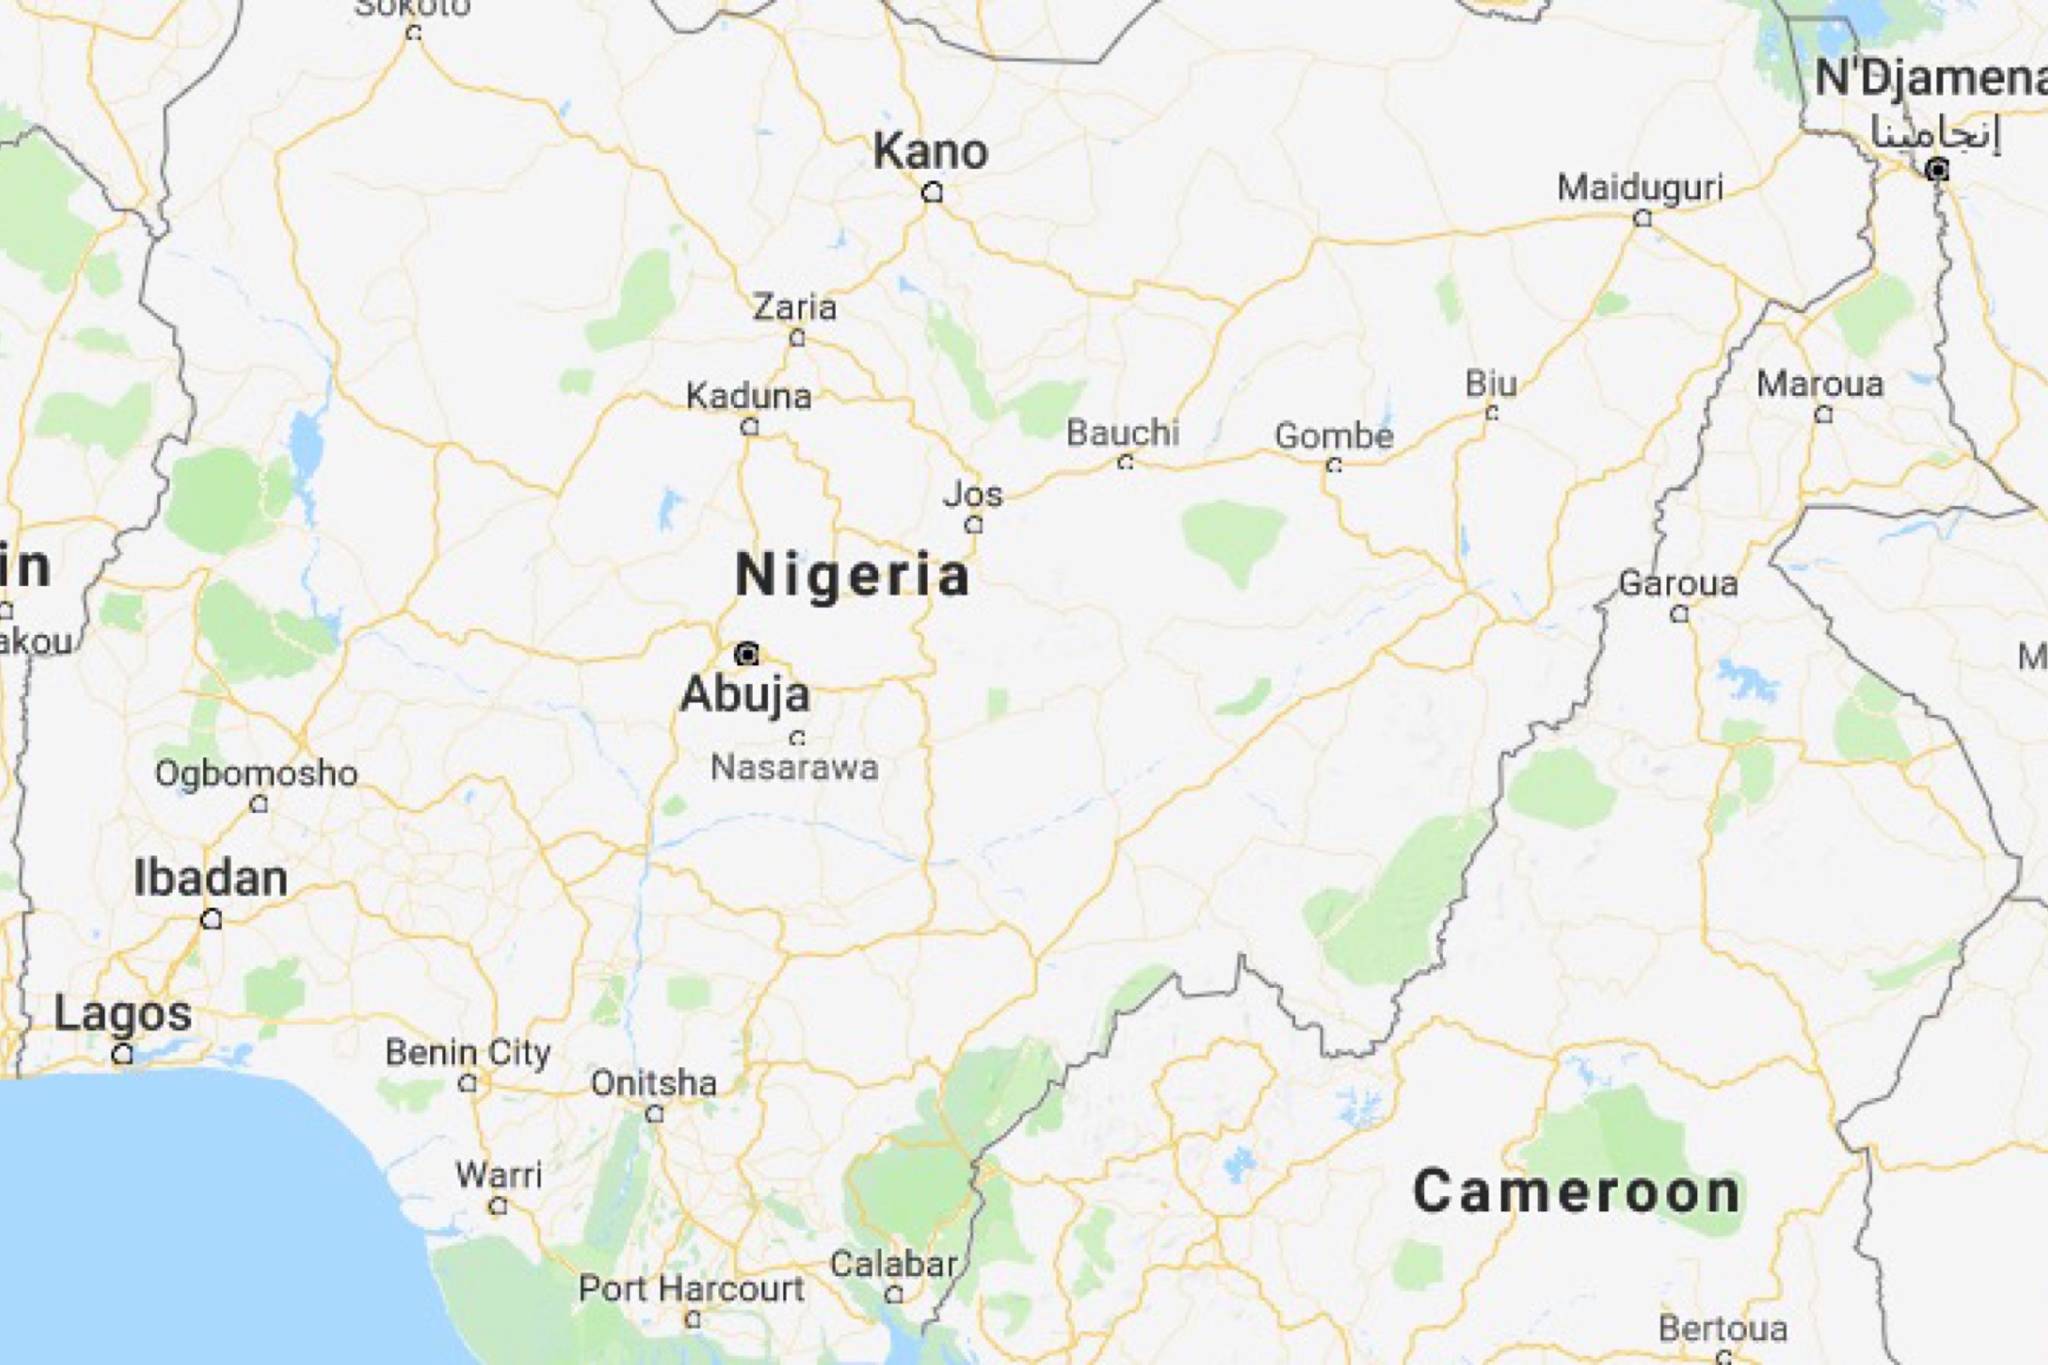 Global Affairs aware of report of two Canadians kidnapped in Nigeria